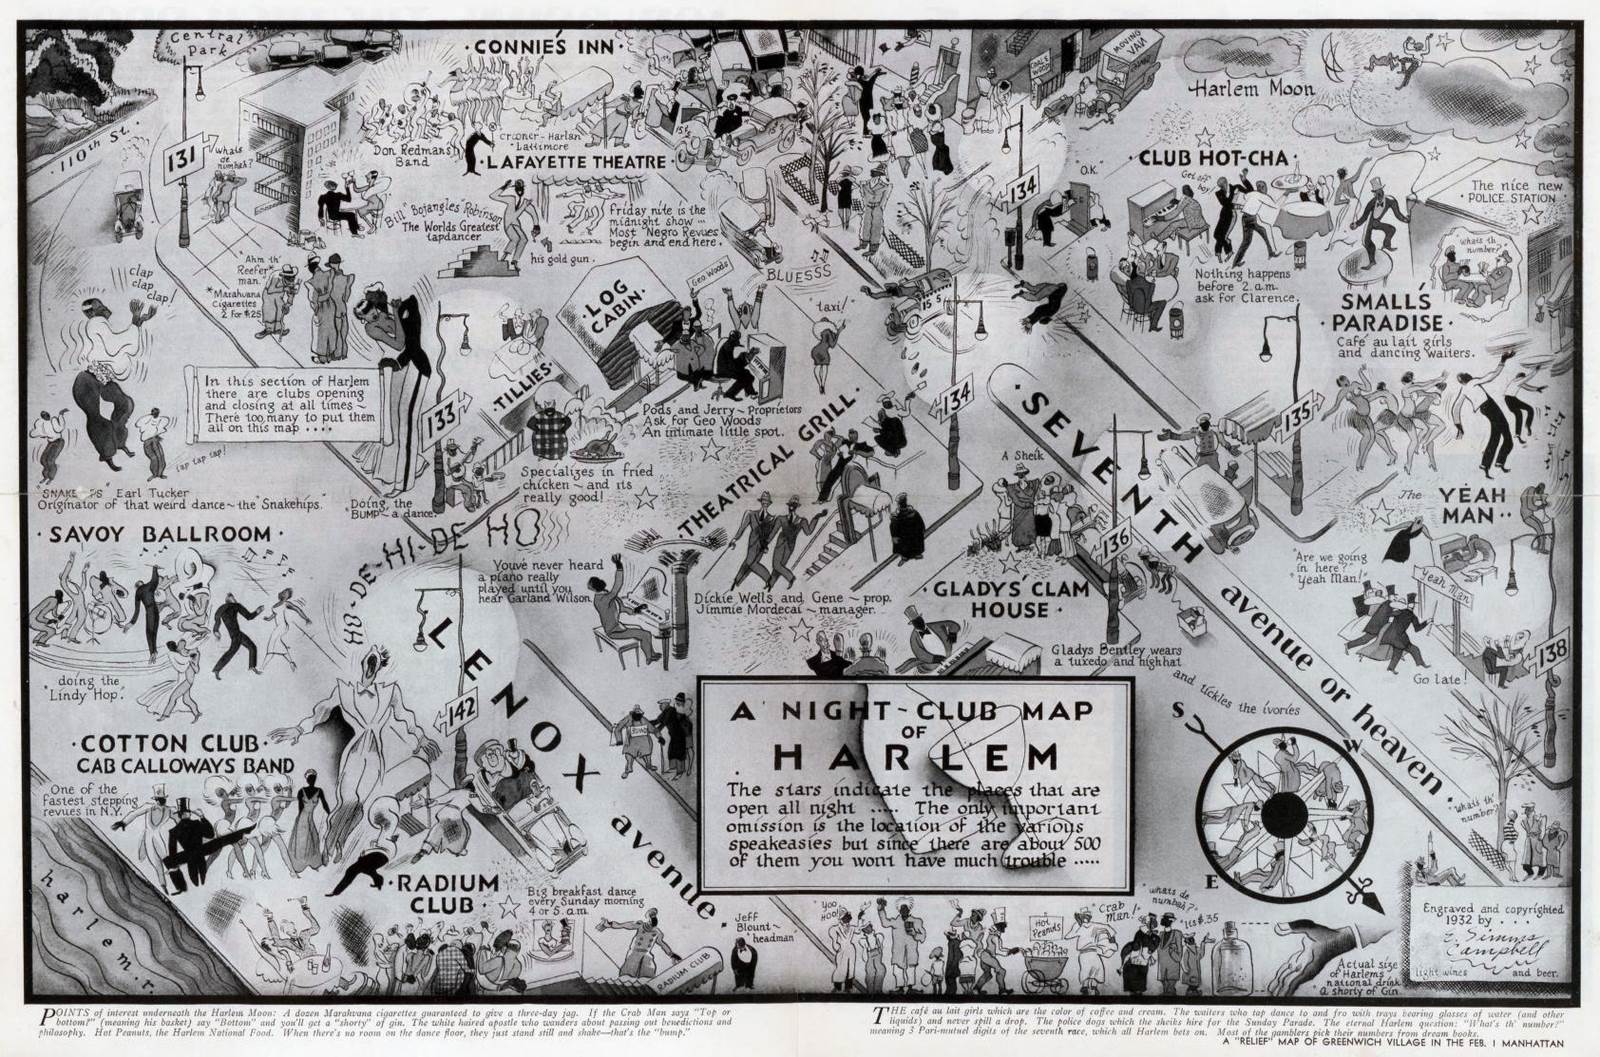 A black-and-white illustrated rendition of a map of the night club venues in Harlem, New York, during the Harlem Renaissance era. The illustration is divided into the actual streets and venues frequented during the time by Black American patrons and artists, and includes short descriptions of the spaces and stylized drawings of people at those spaces. 